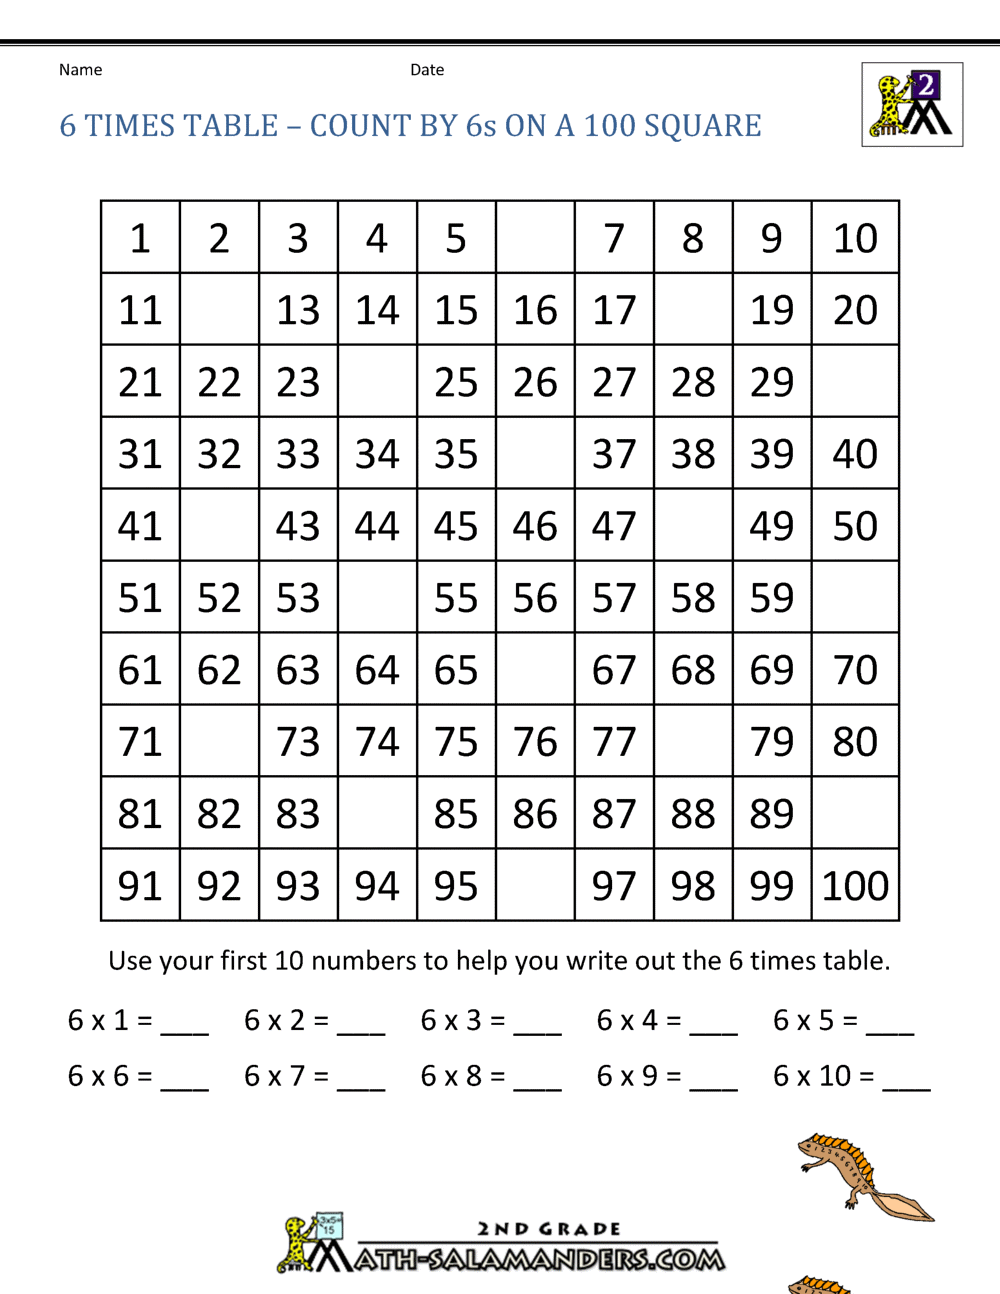 6-times-table